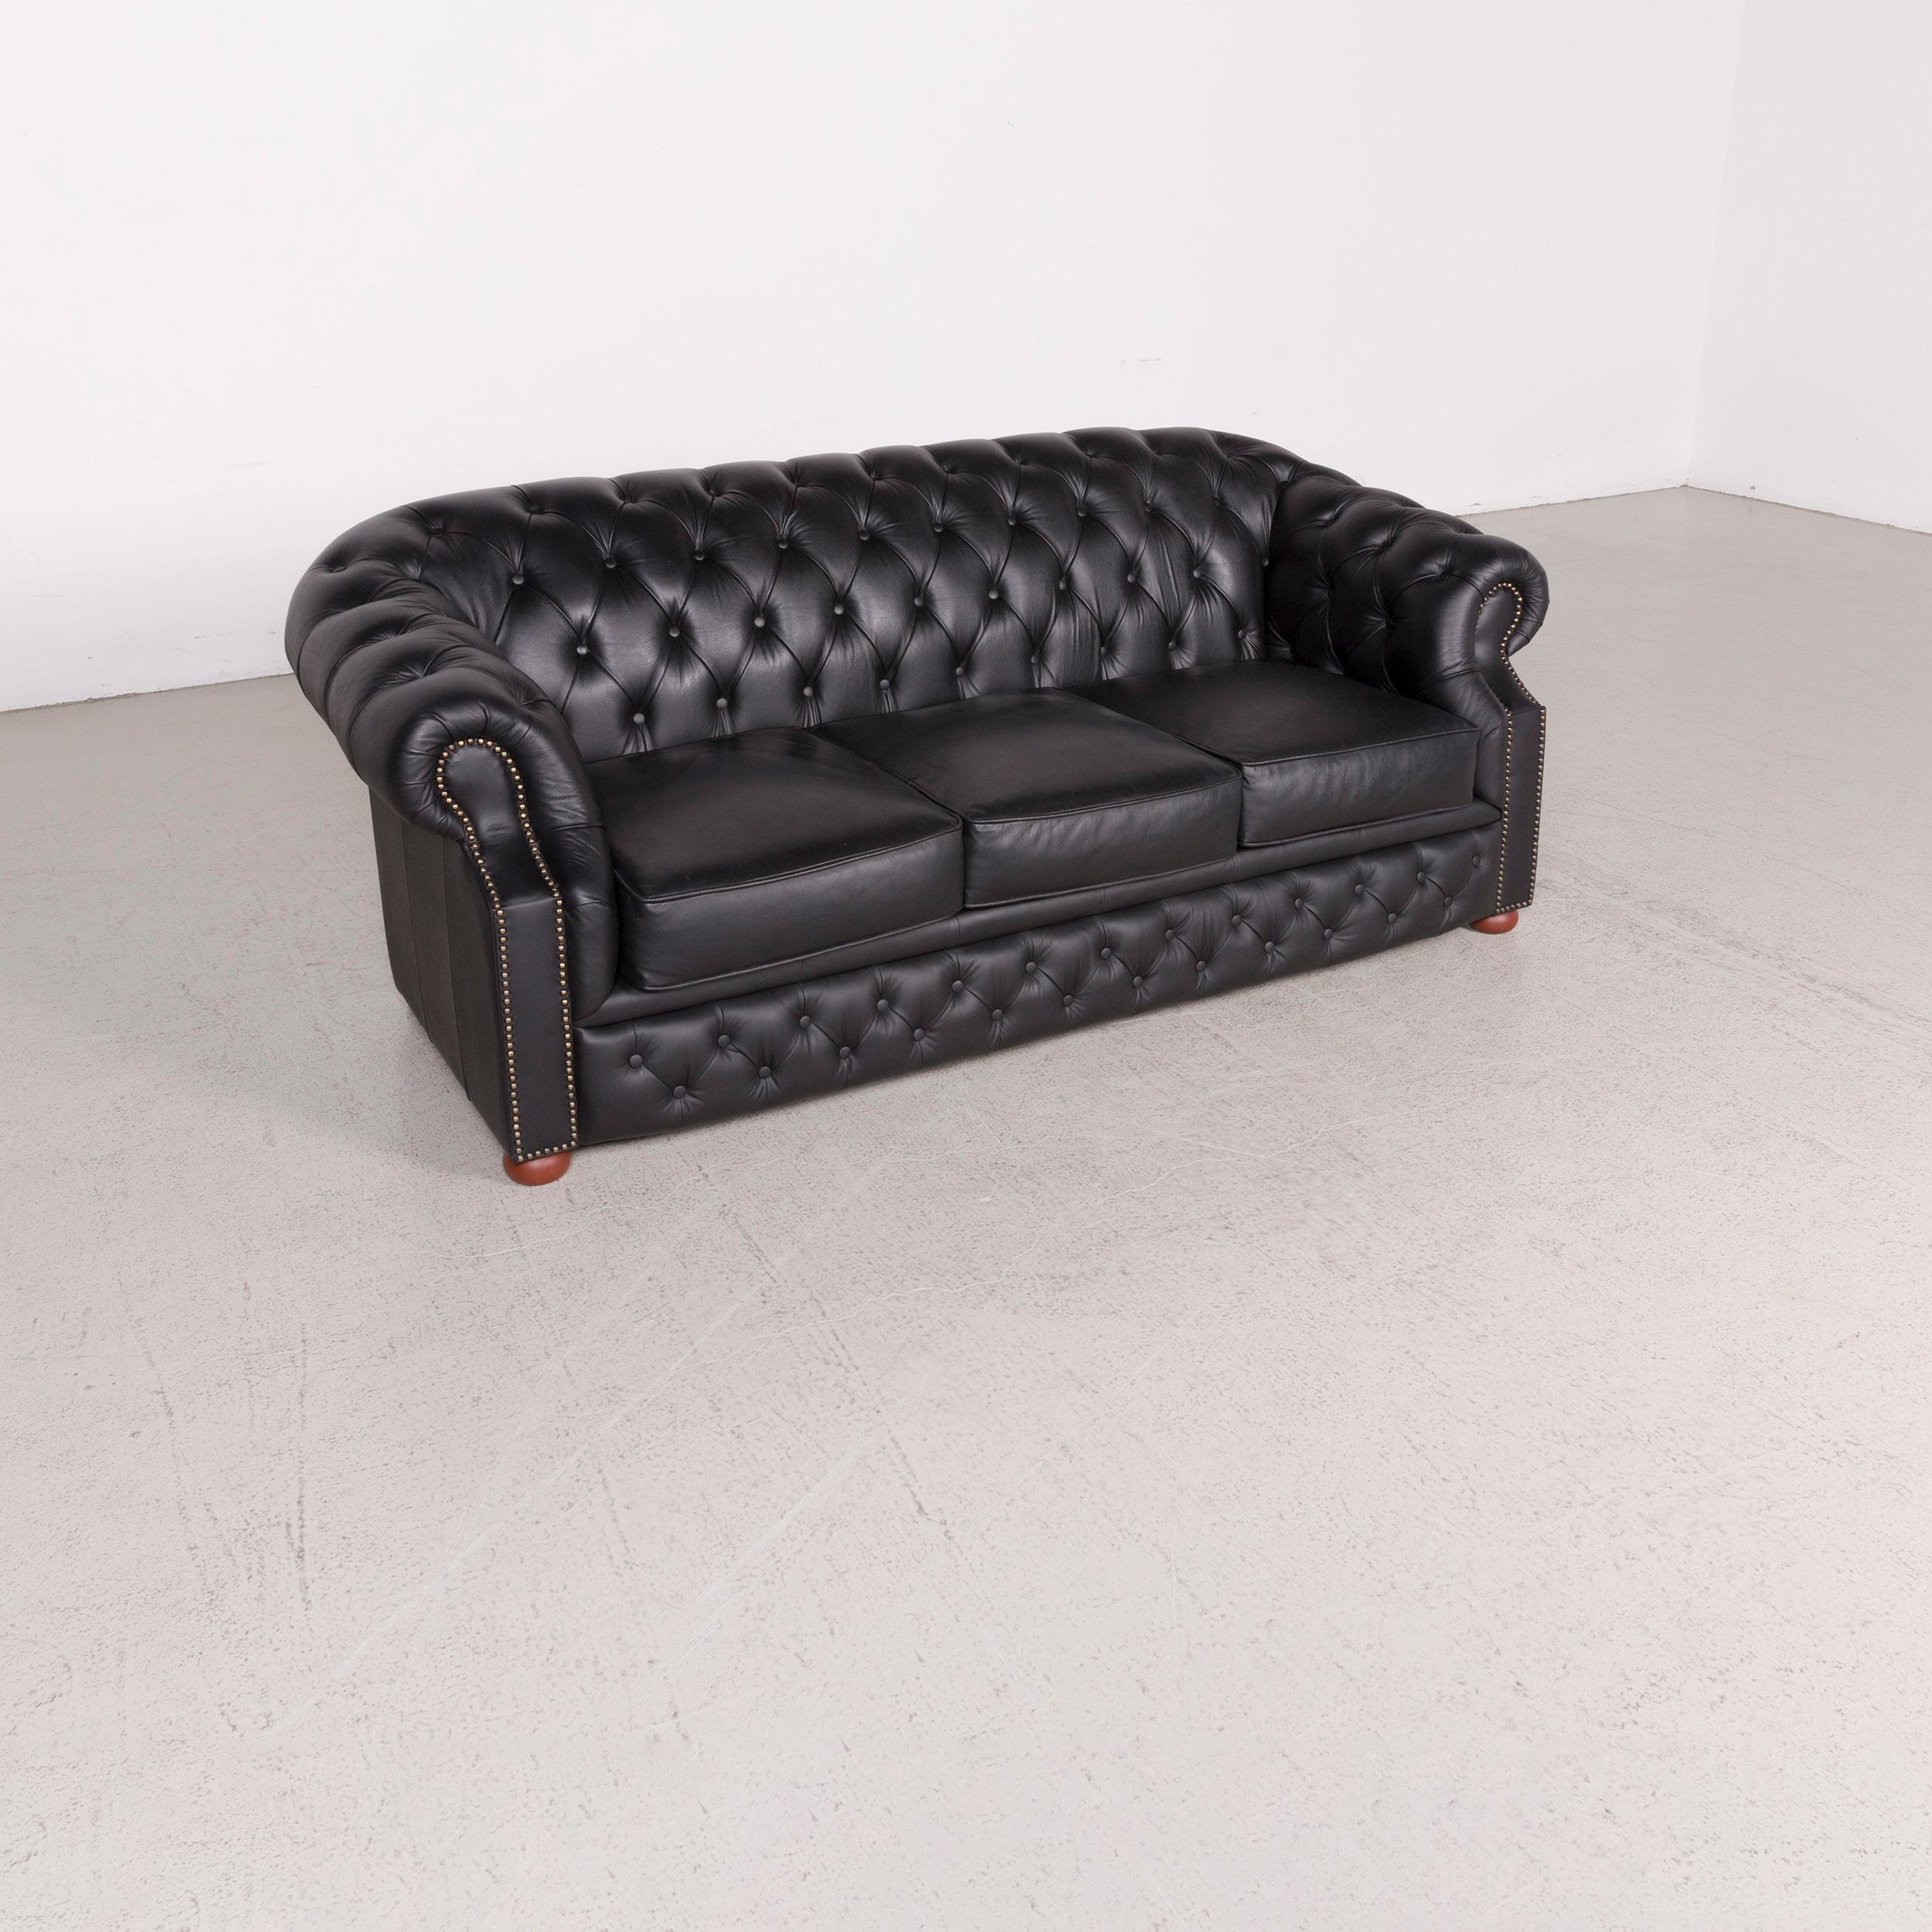 We bring to you a Chesterfield Designer Leather Sofa Black Three-Seater Real Leather Couch Retro.
SKU: #8222

Product Measurements in centimeters:

depth: 90
width: 205
height: 80
seat-height: 45
rest-height: 65
seat-depth: 55
seat-width: